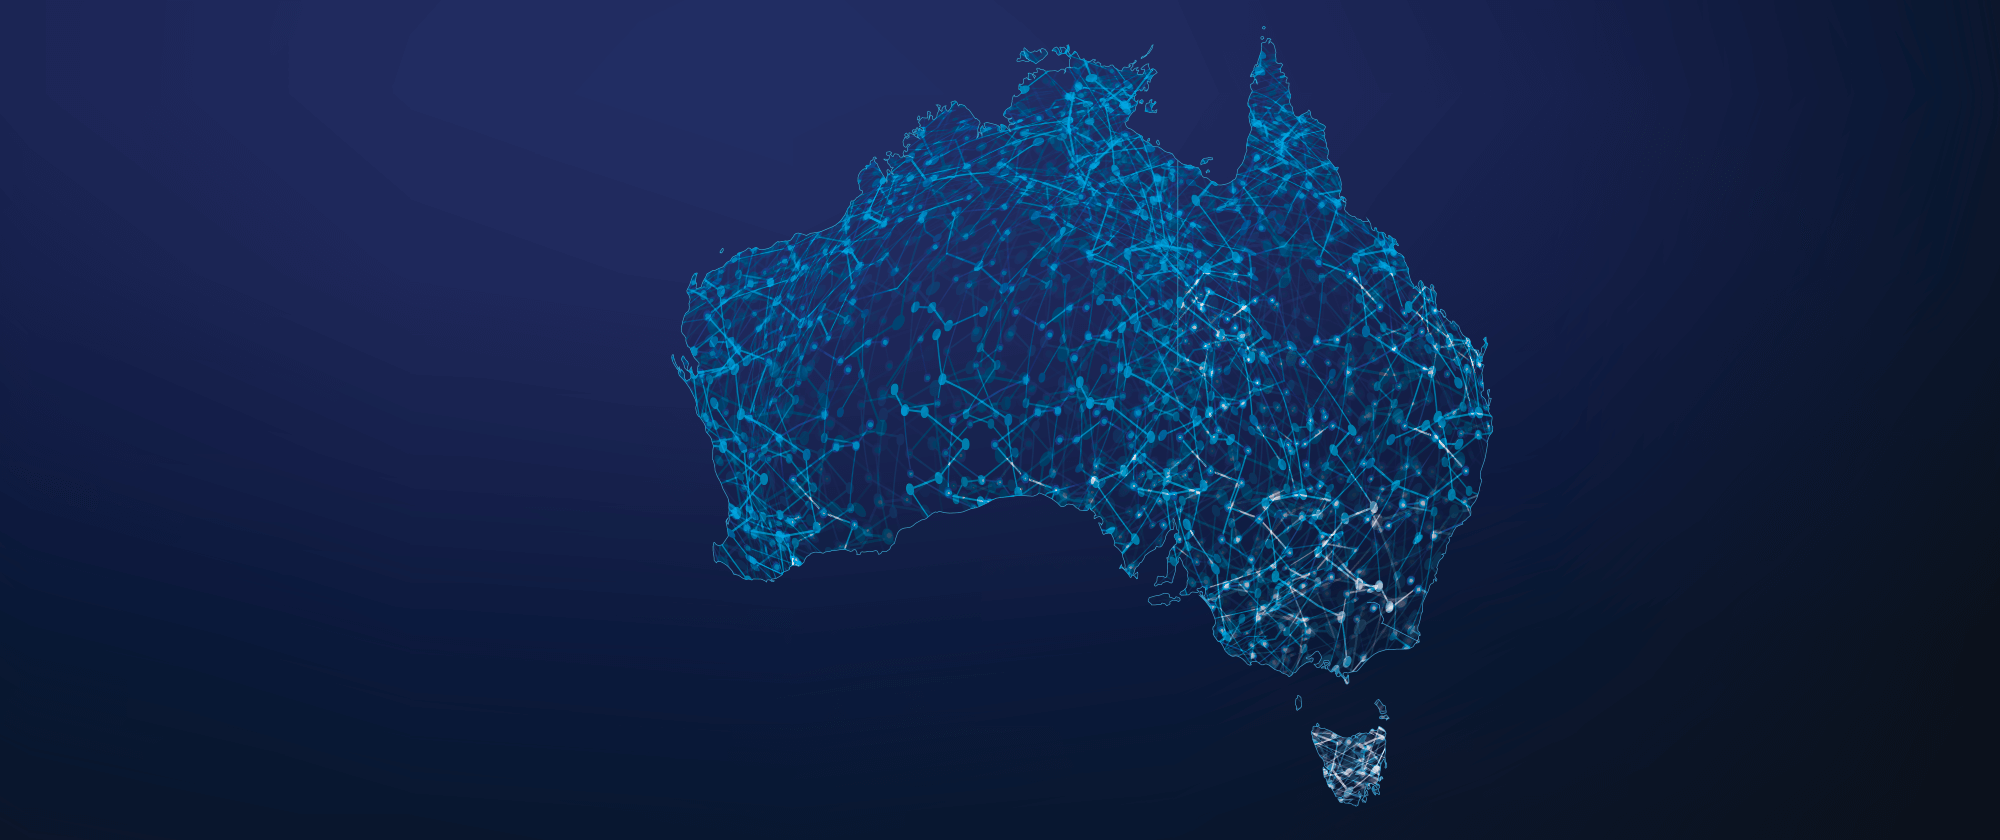 A digital wireframe representation of the continent of australia, including tasmania, set against a dark blue background, evoking a sense of technological integration or futuristic mapping.